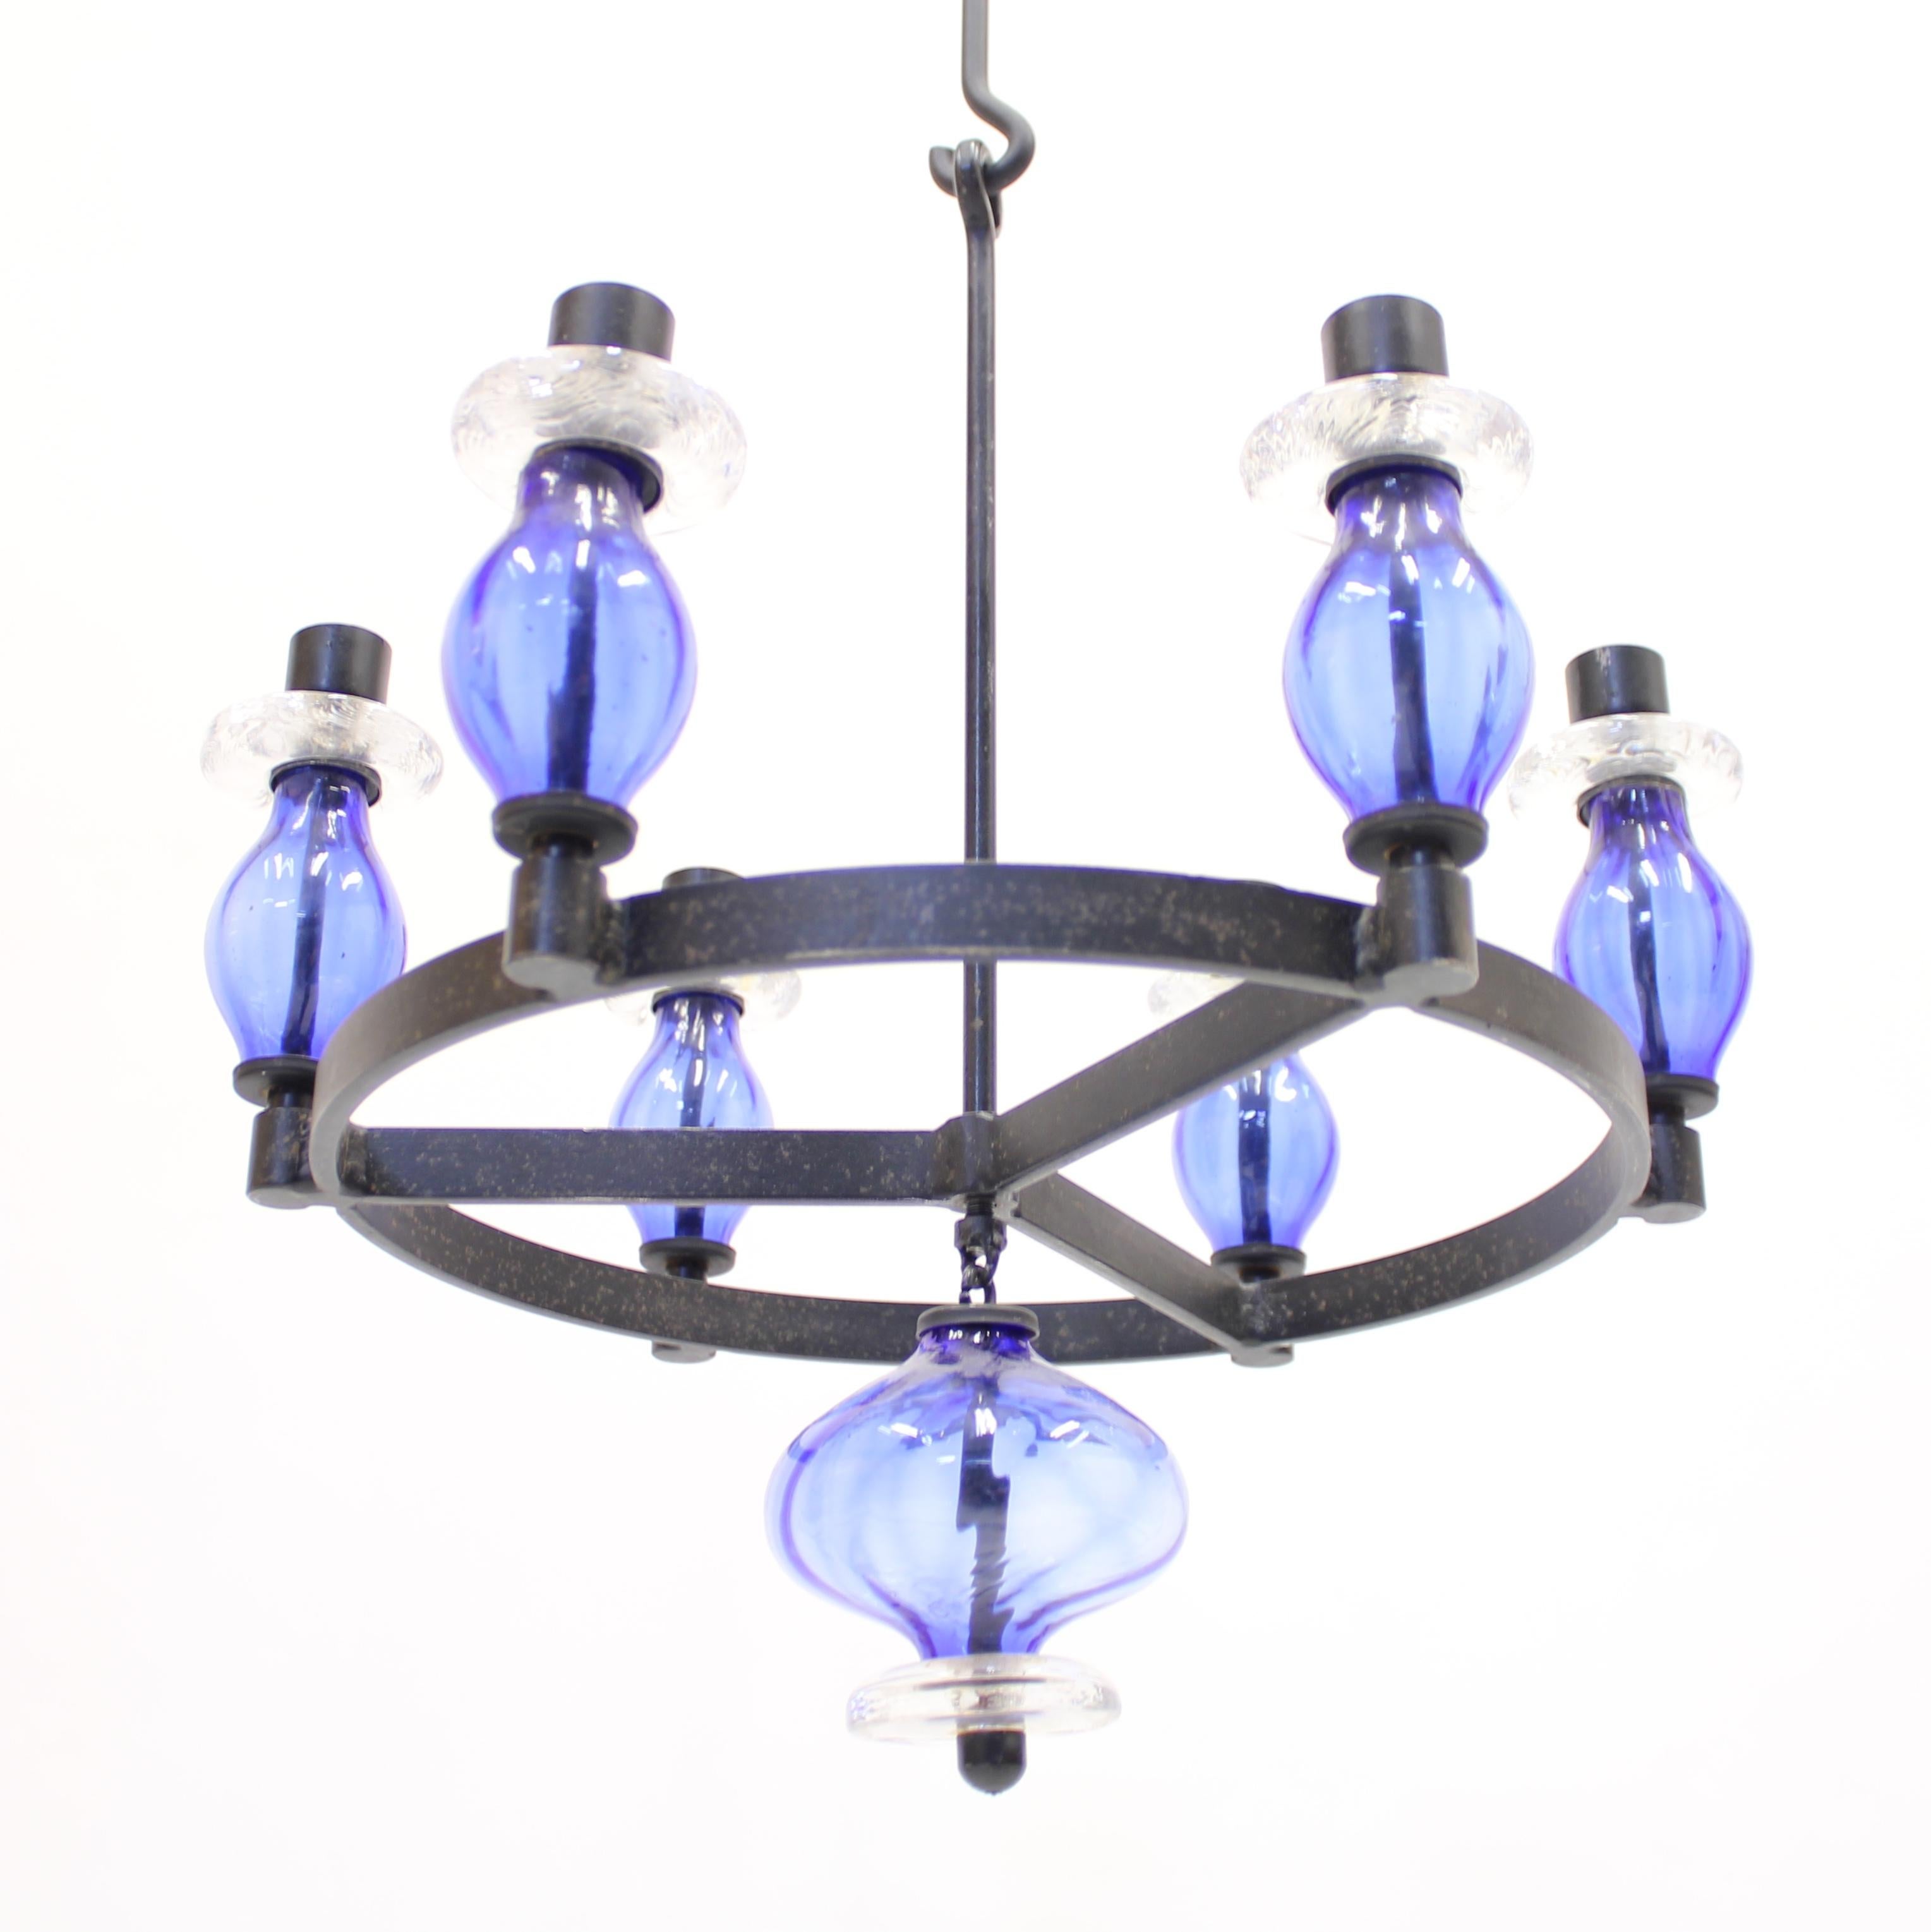 Erik Höglund, Rare Glass and Wrought Iron Chandelier, Boda Smide, 1960s For Sale 4